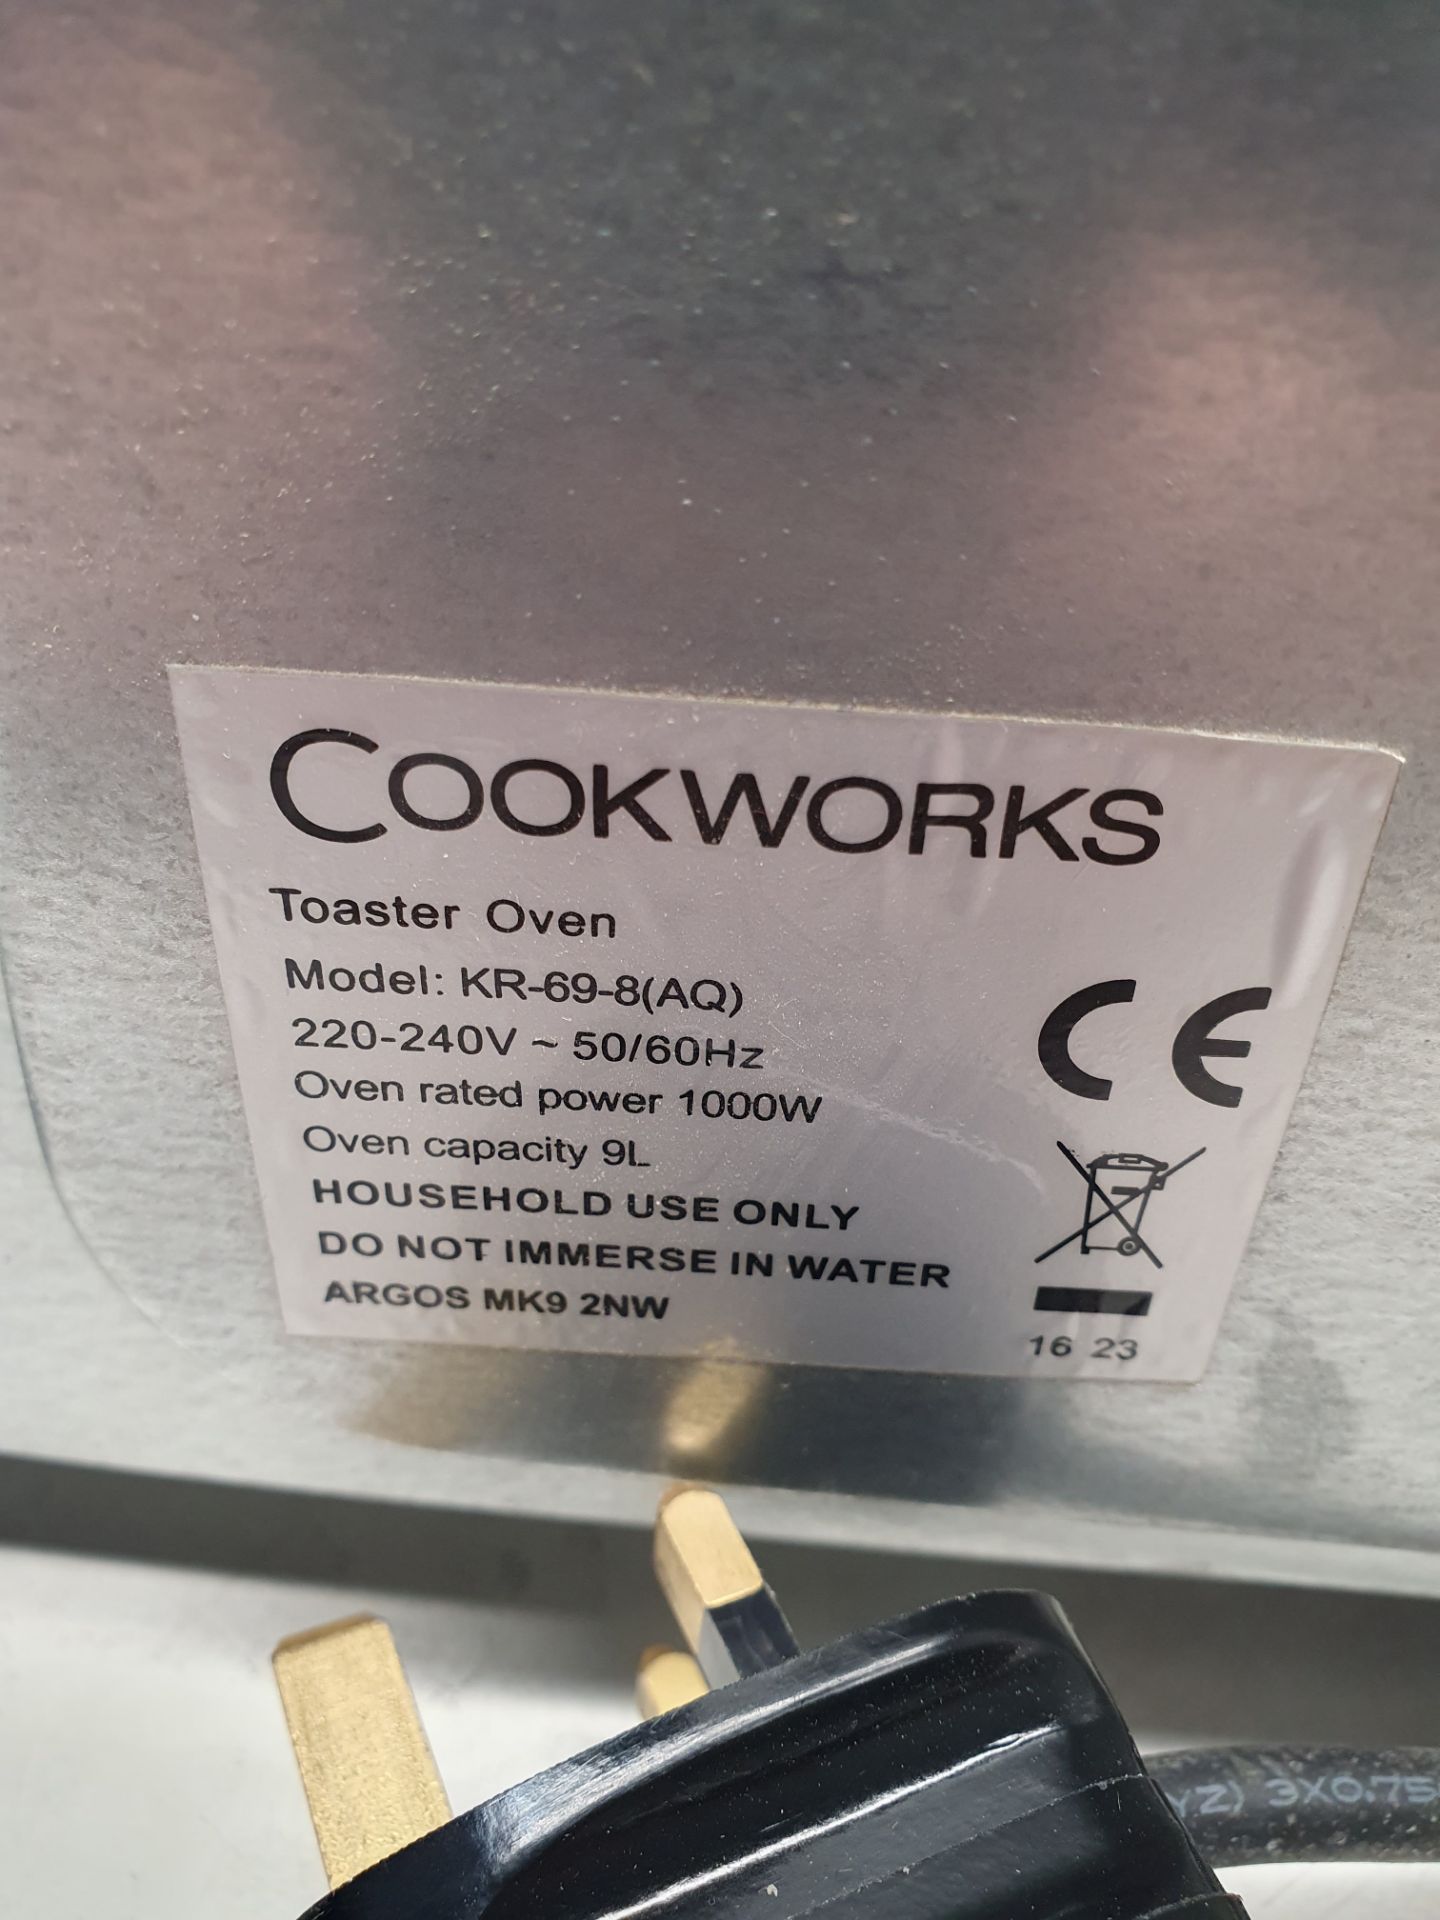 Cookworks Toaster Oven - Image 4 of 5